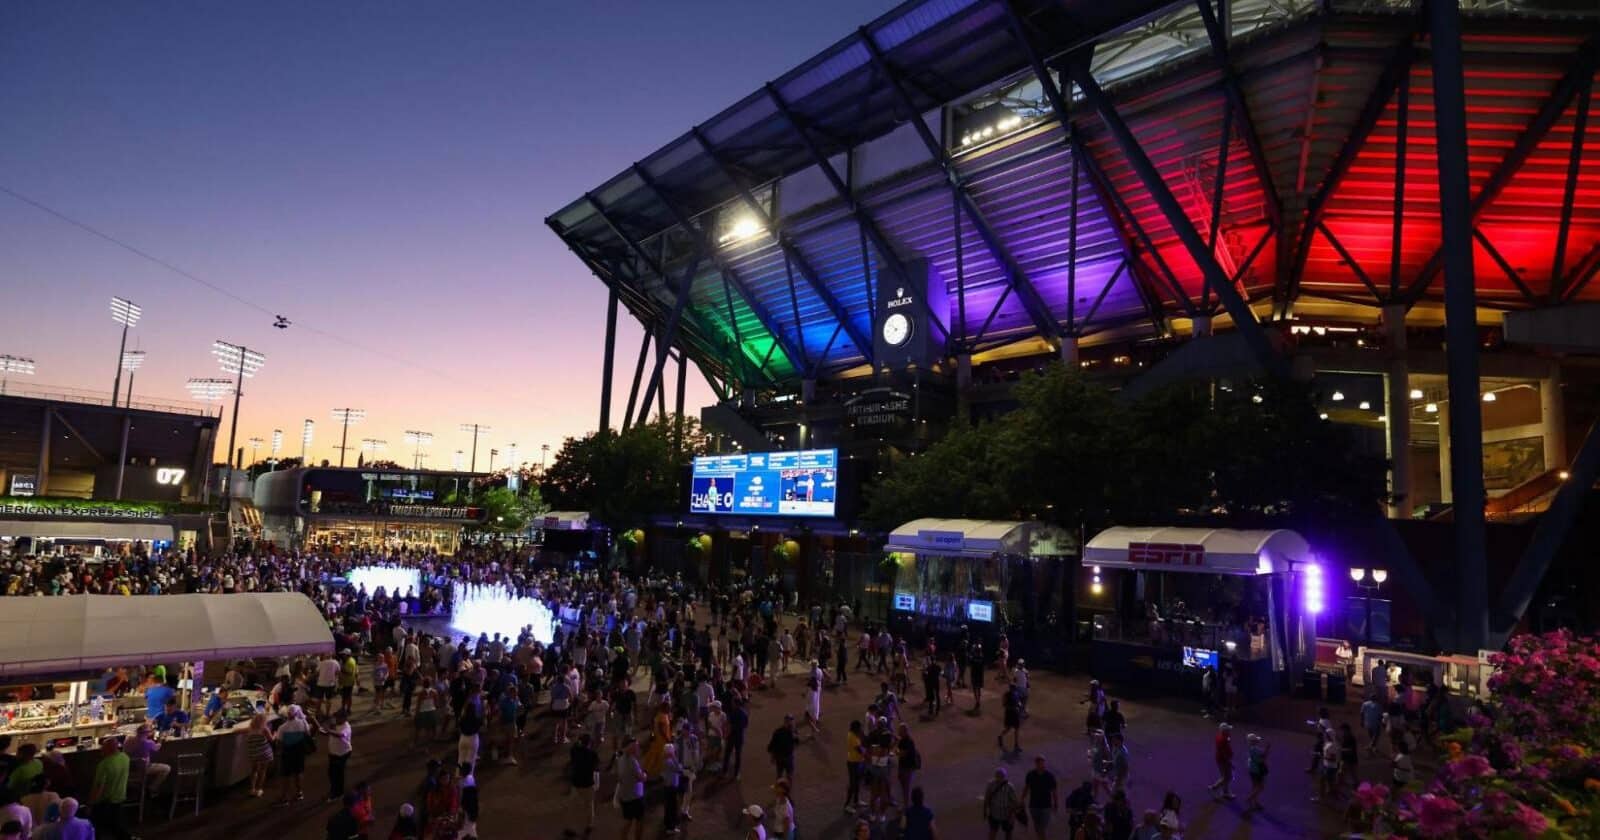 A crowd outside the US Open stadium at night